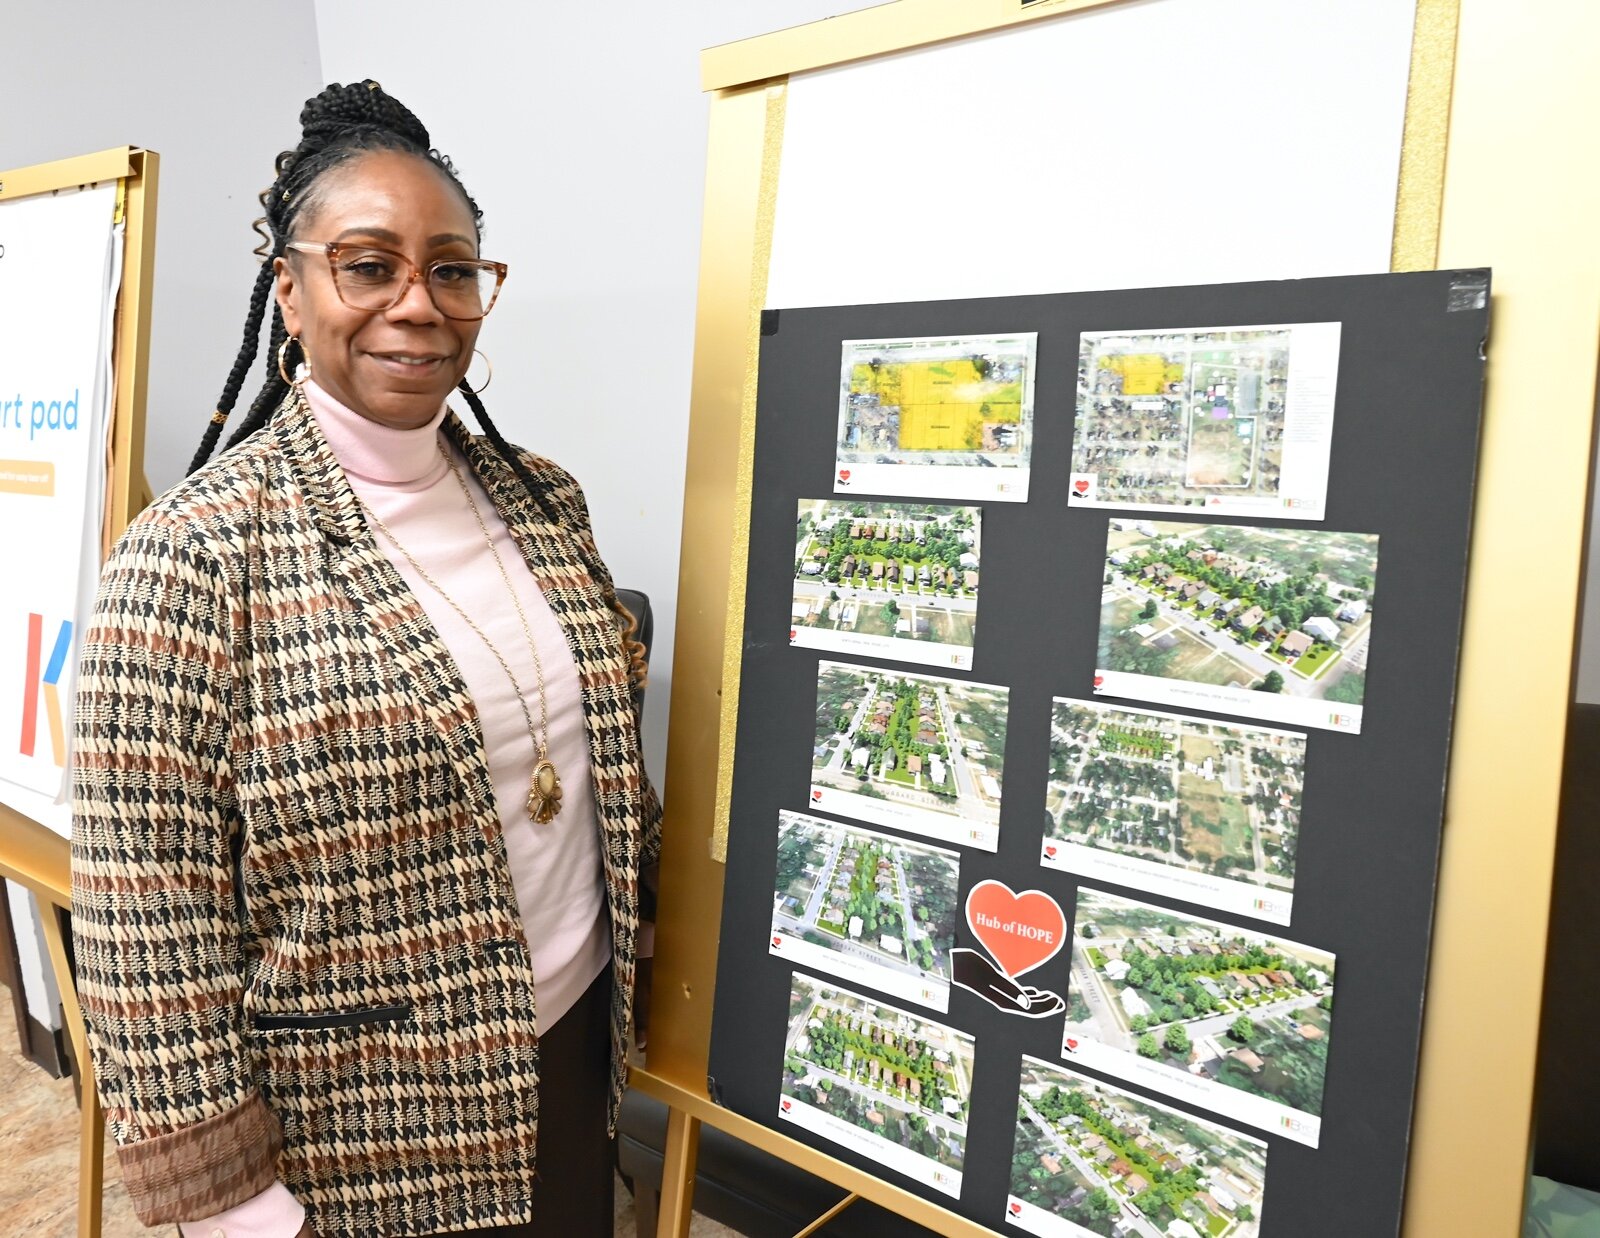 Rev. Monique French, pastor of Washington Heights United Methodist Church, stands next to a poster showing architectural concepts of the planned property development.